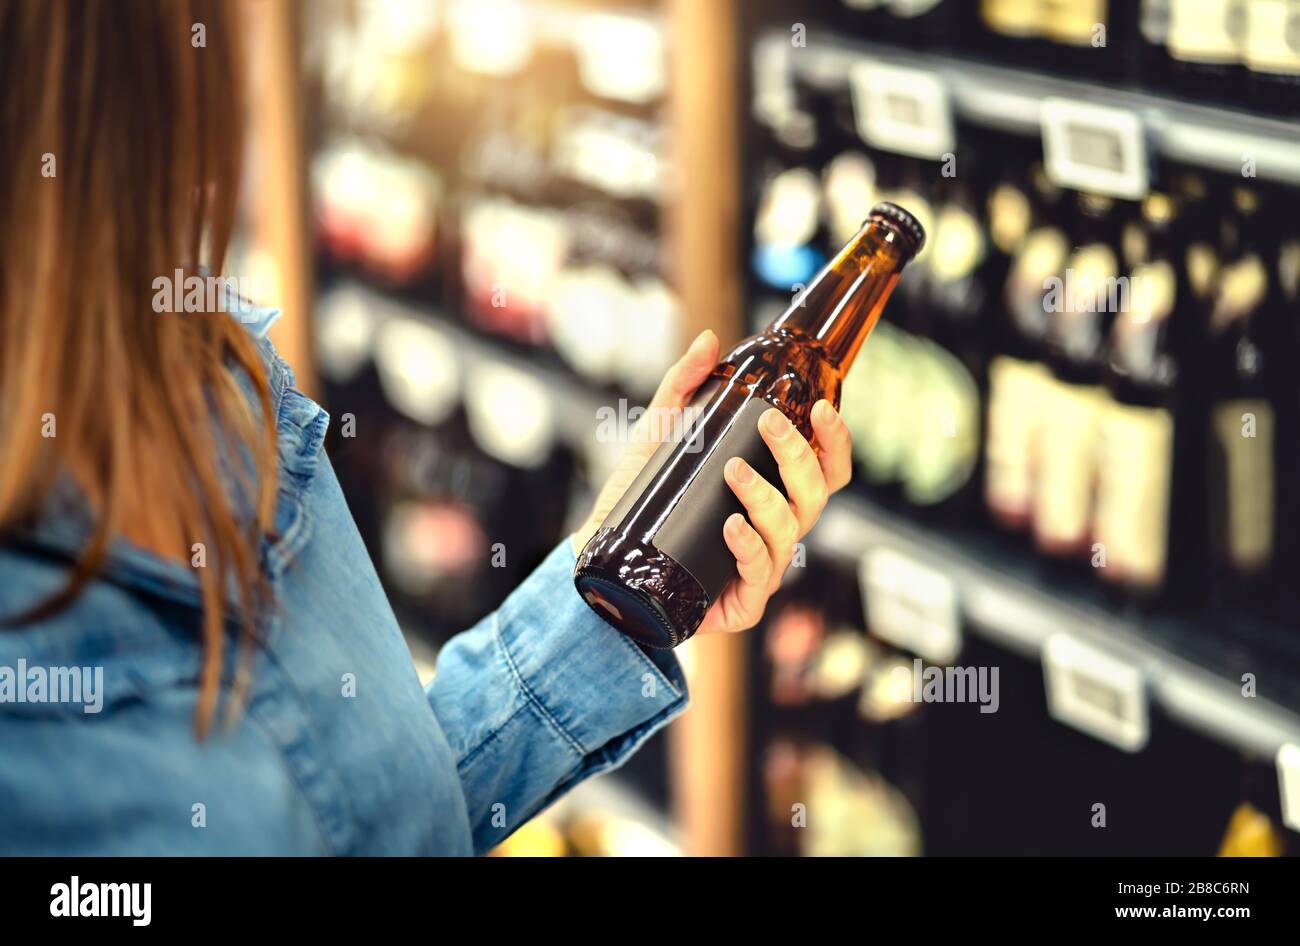 Customer buying beer in liquor store. Lager, craft or wheat beer. IPA or pale ale. Woman at alcohol shelf. Drink section and aisle in supermarket. Stock Photo